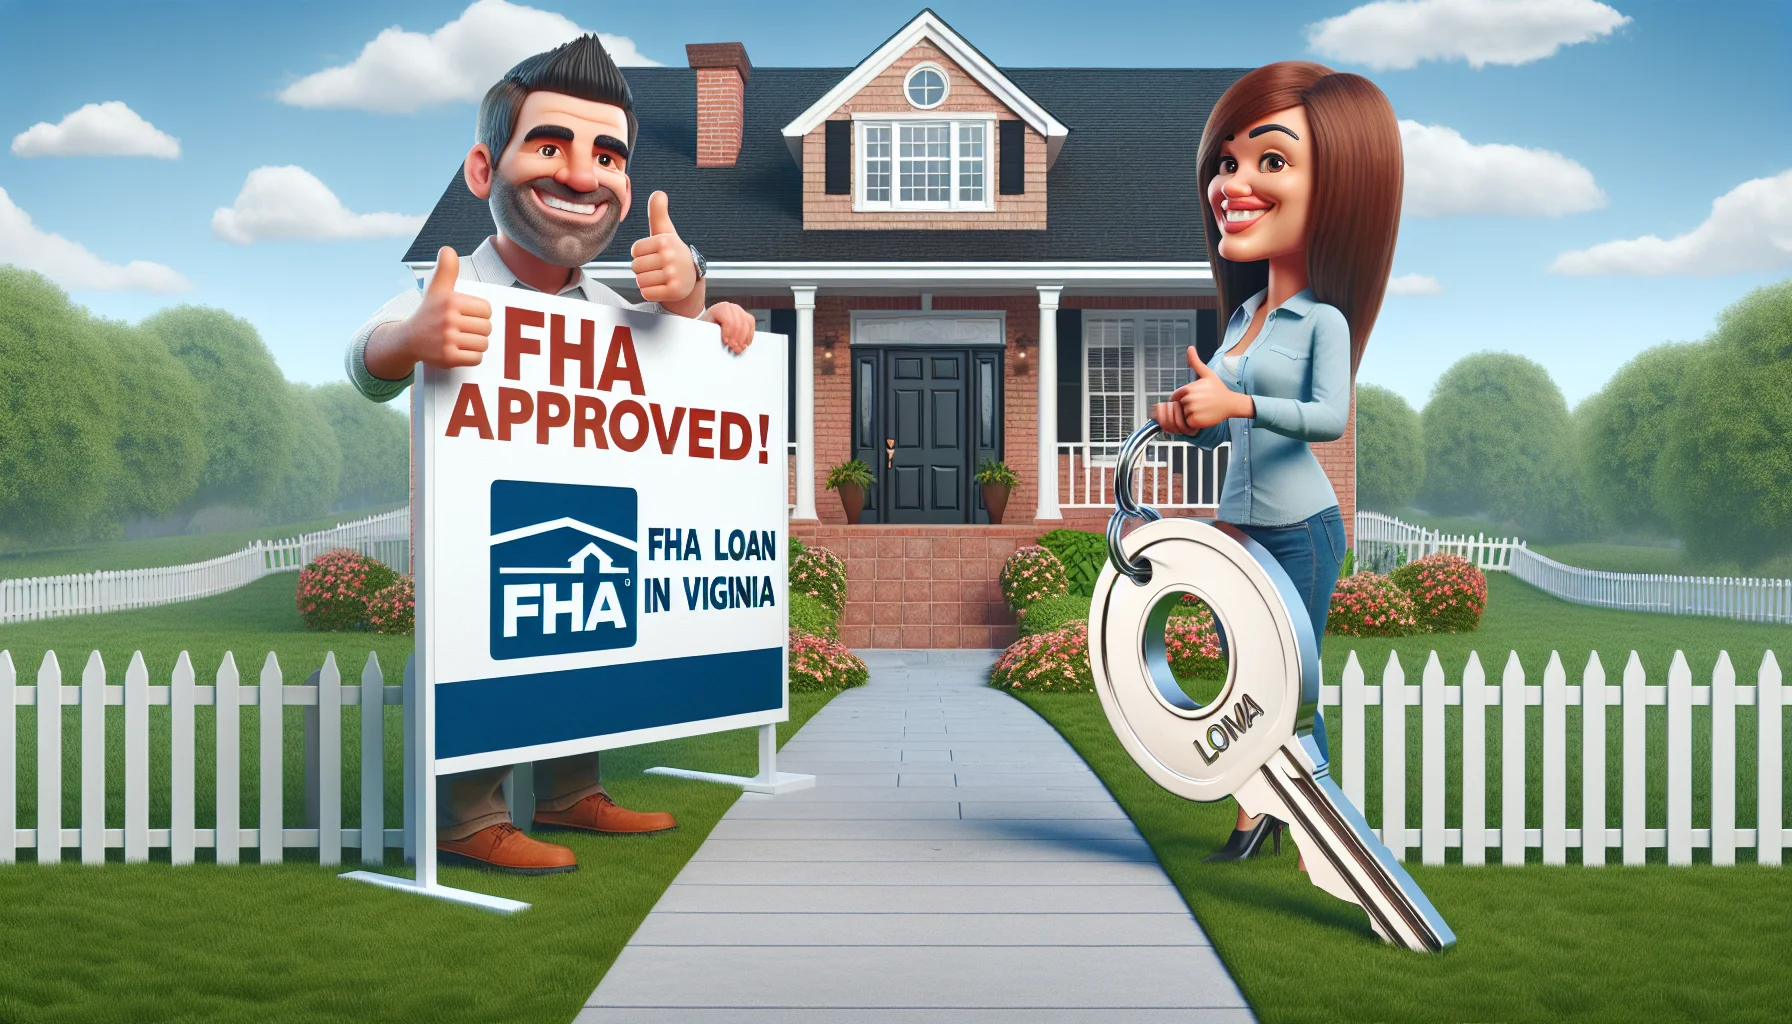 Create a humorous yet realistic image that depicts an ideal scenario surrounding FHA loans in Virginia, regarding real estate. Visualize a large, beautiful, and charming brick house with a white picket fence. Happy homeowners, one Caucasian man and one Hispanic woman, are in front of their home proudly displaying a big banner that reads 'FHA Loan Approved!' There's also a comically oversize key nearby, representing their new home ownership. Include a lush green lawn leading towards a well-maintained sidewalk to give the setting a perfect suburbia feel. Skies should be clear indicating a bright, hopeful future.